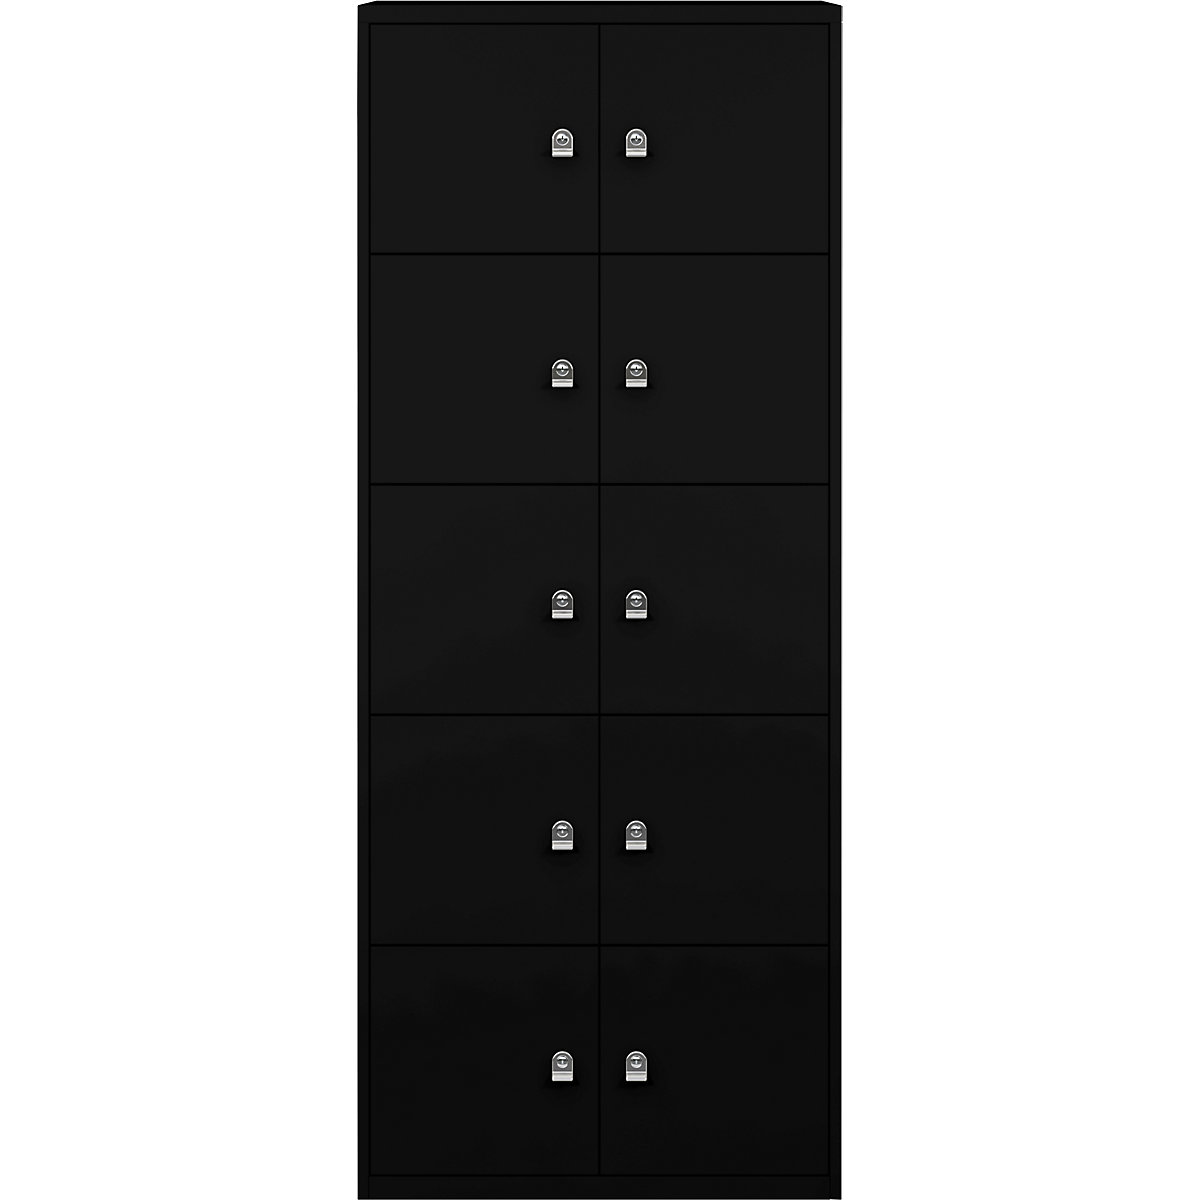 BISLEY – LateralFile™ lodge, with 10 lockable compartments, height 375 mm each, black